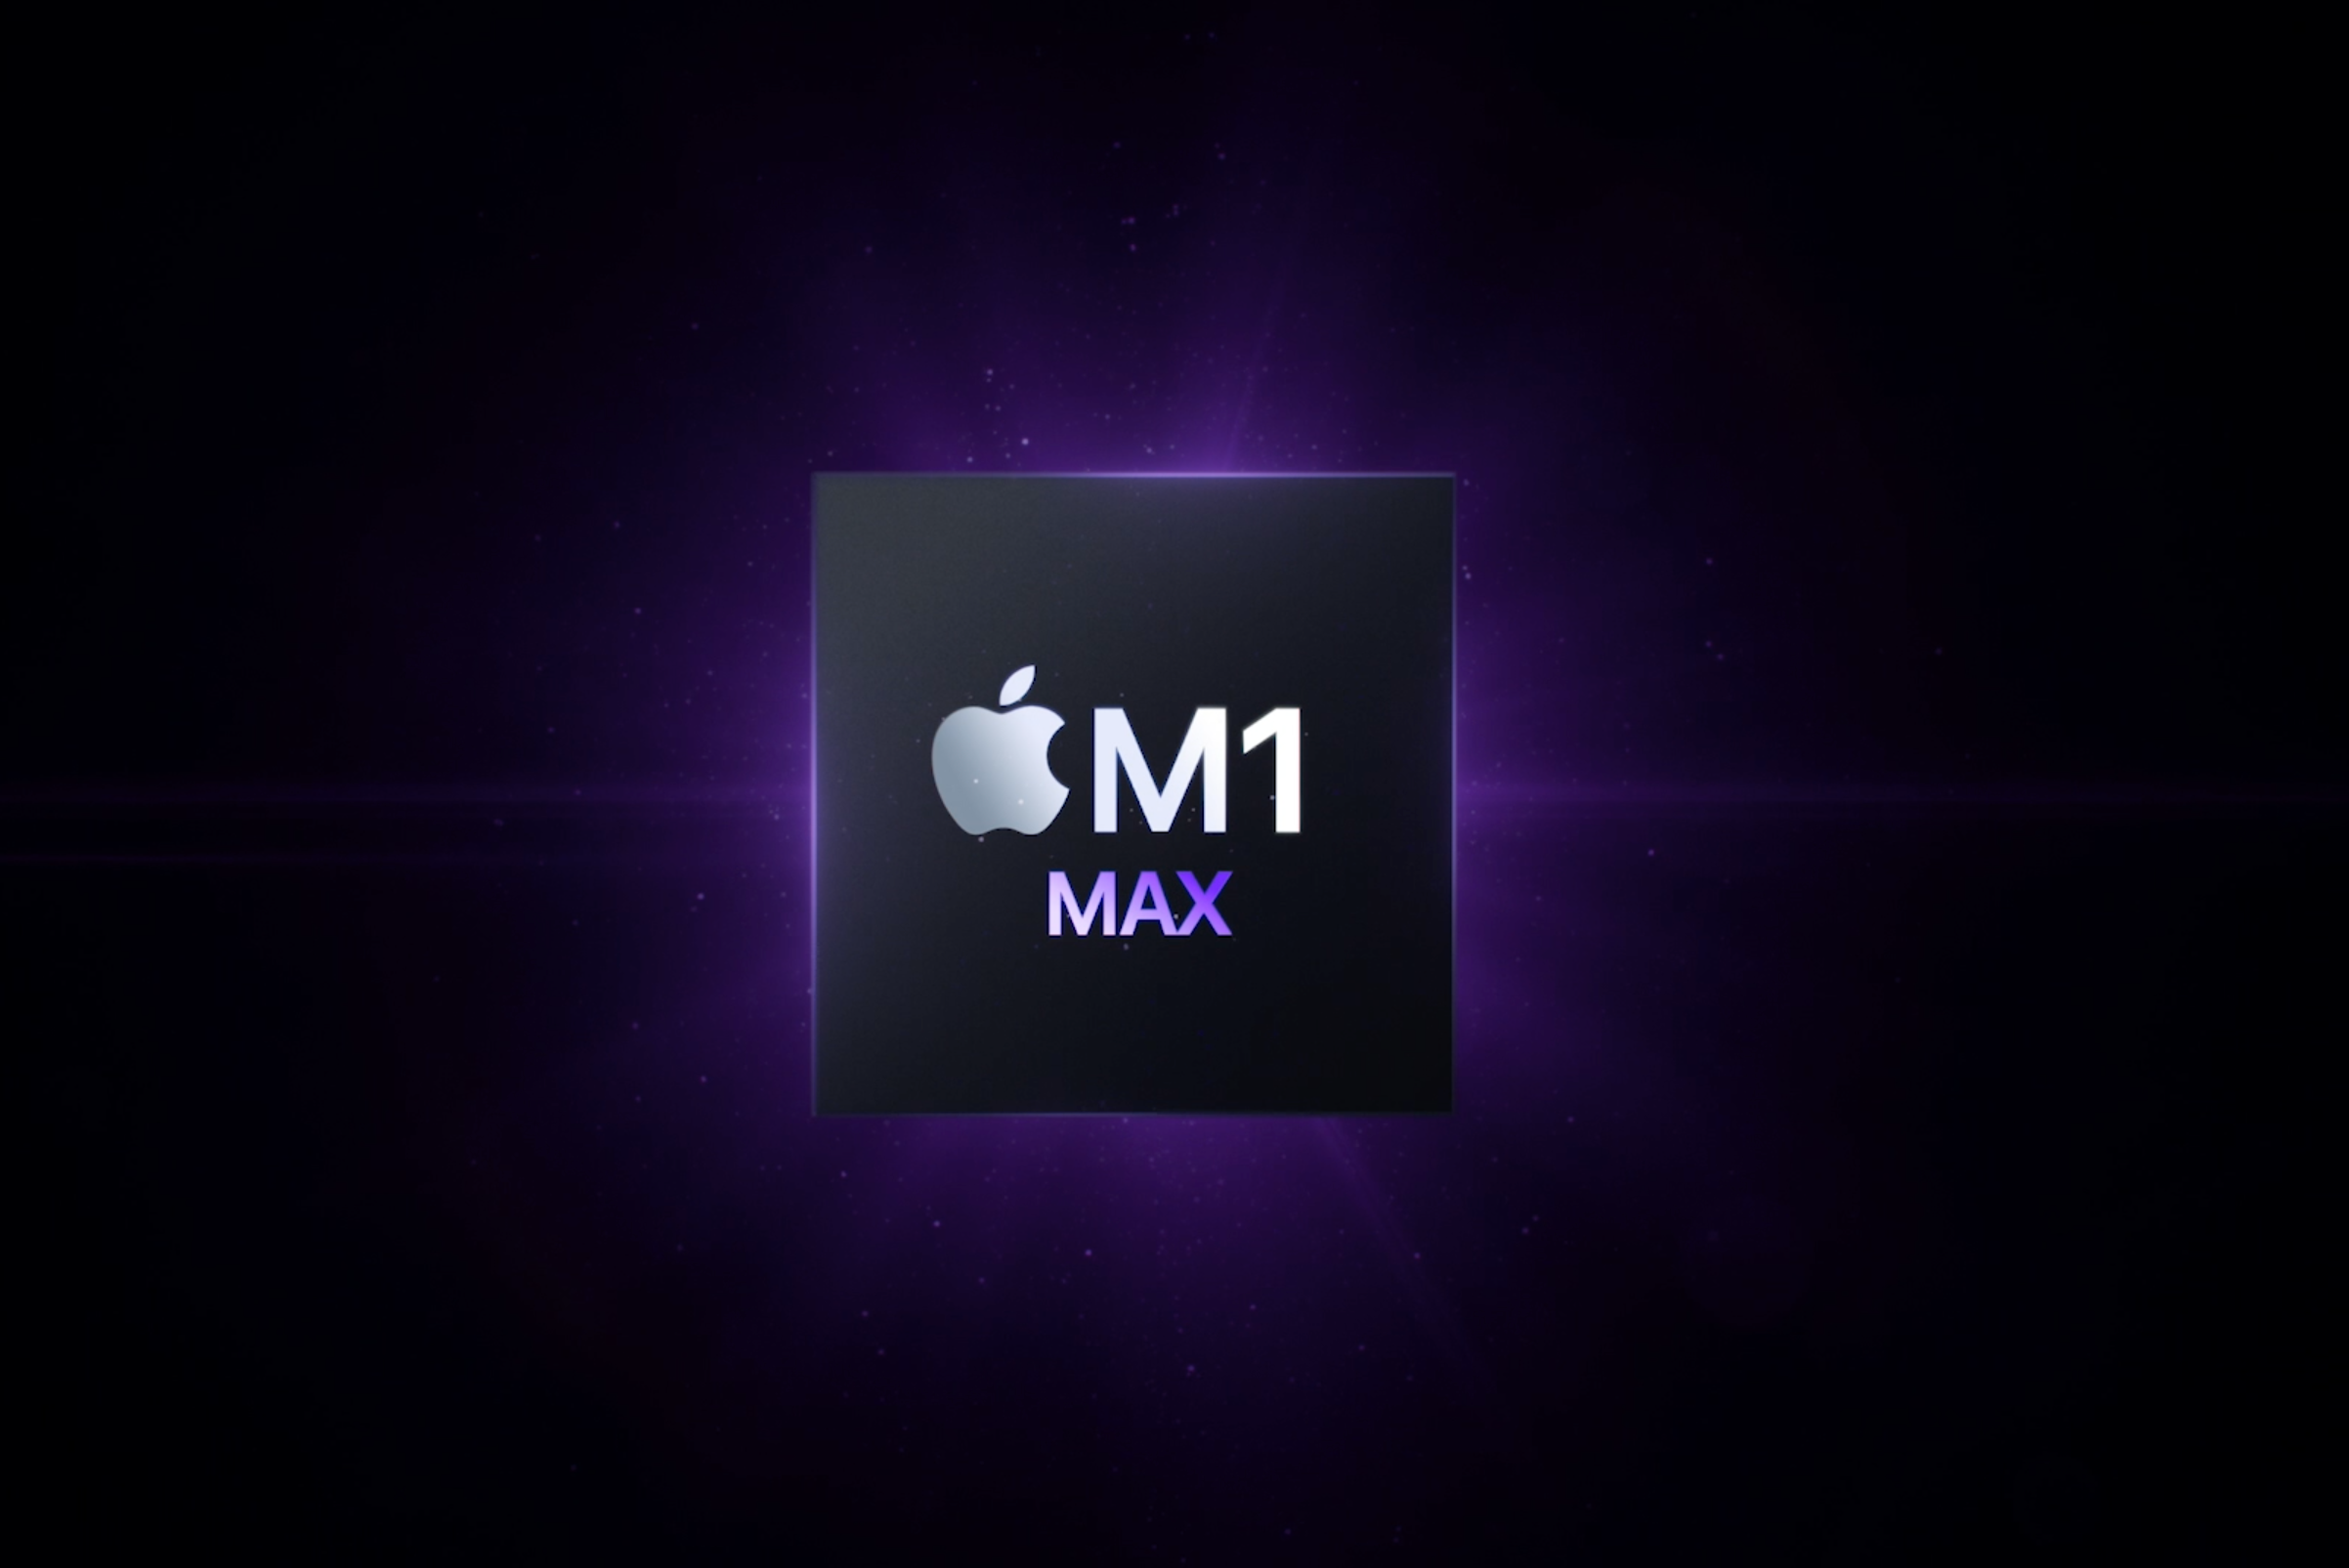 The Mac Pro could have an even more powerful chip than the Apple M1 Max